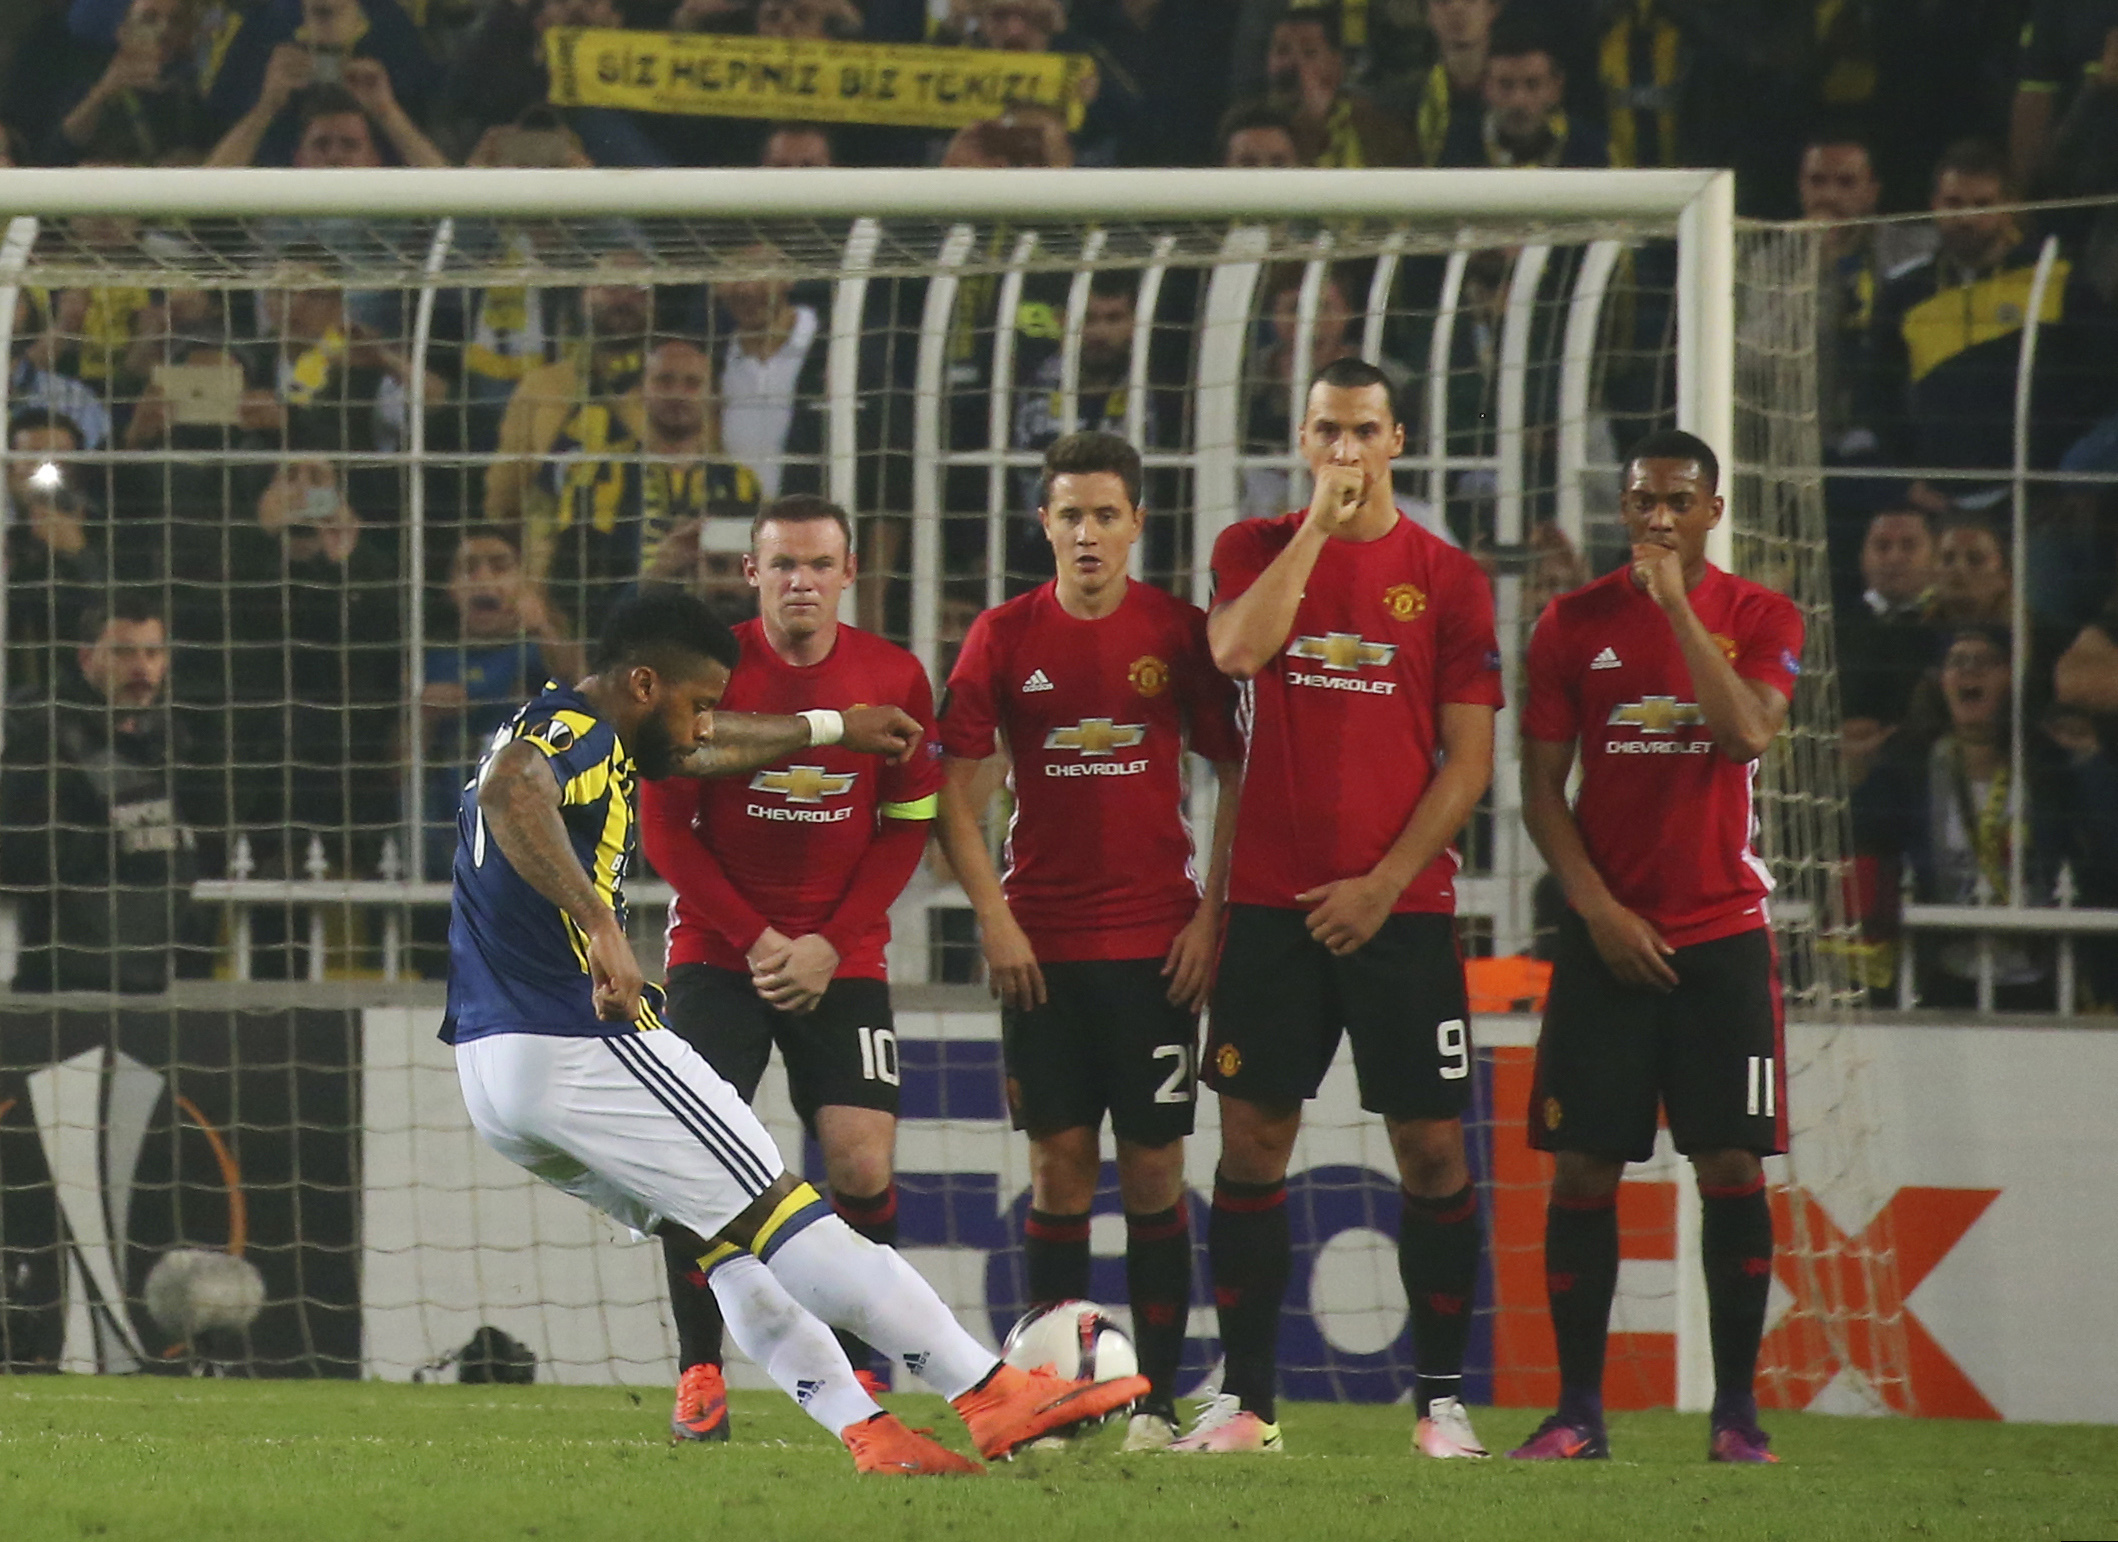 Fenerbahce Jeremain Lens shoots to score against Manchester United, during a Europa League group A soccer match between Fenerbahce and Manchester United, in Istanbul, Thursday, Nov. 3, 2016. Fenerbahce won the match 2-1. (AP Photo)